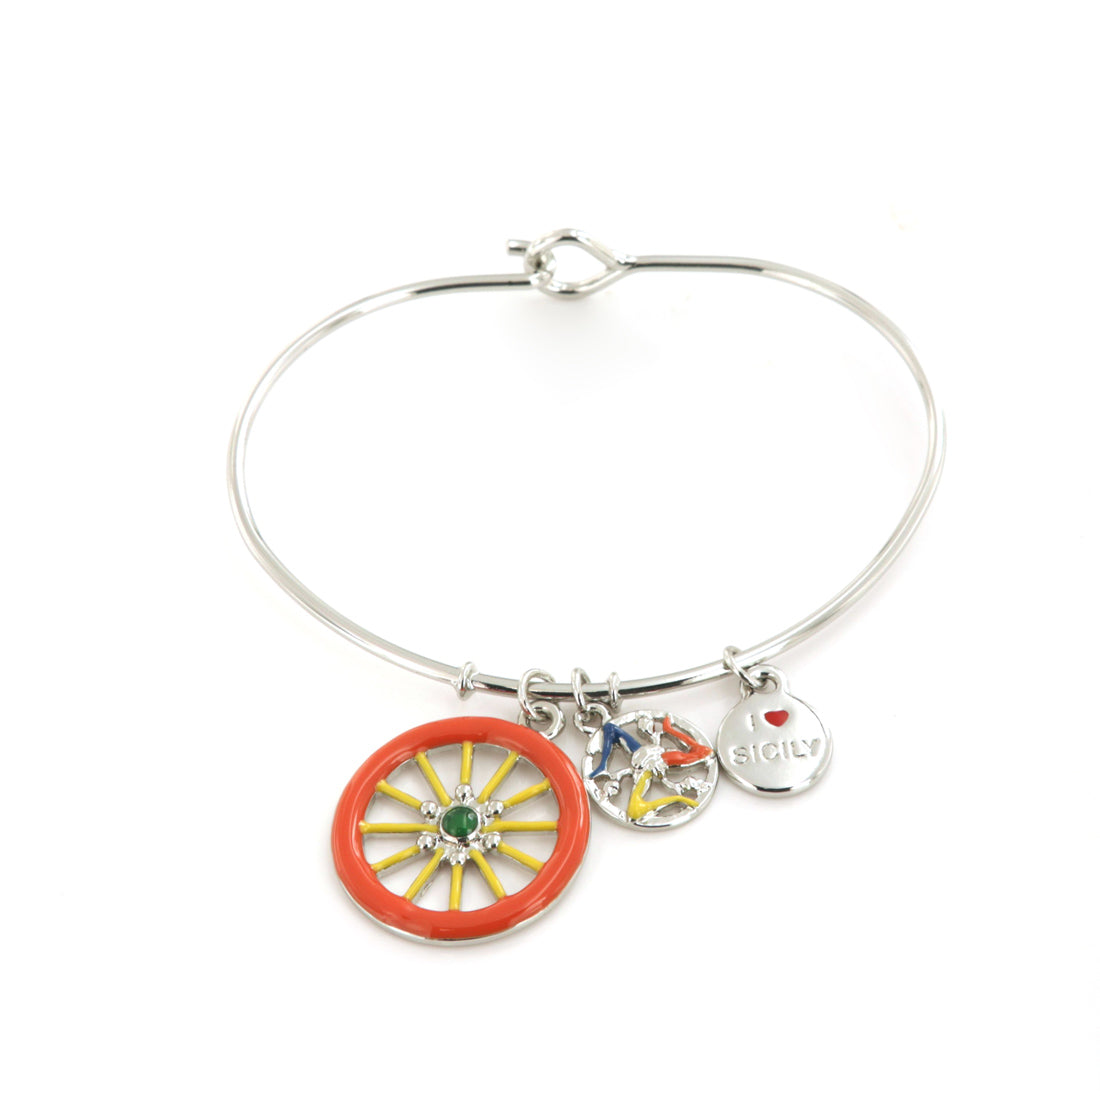 Rigid metal bracelet, with a Sicilian cart wheel pending embellished with colored glazes